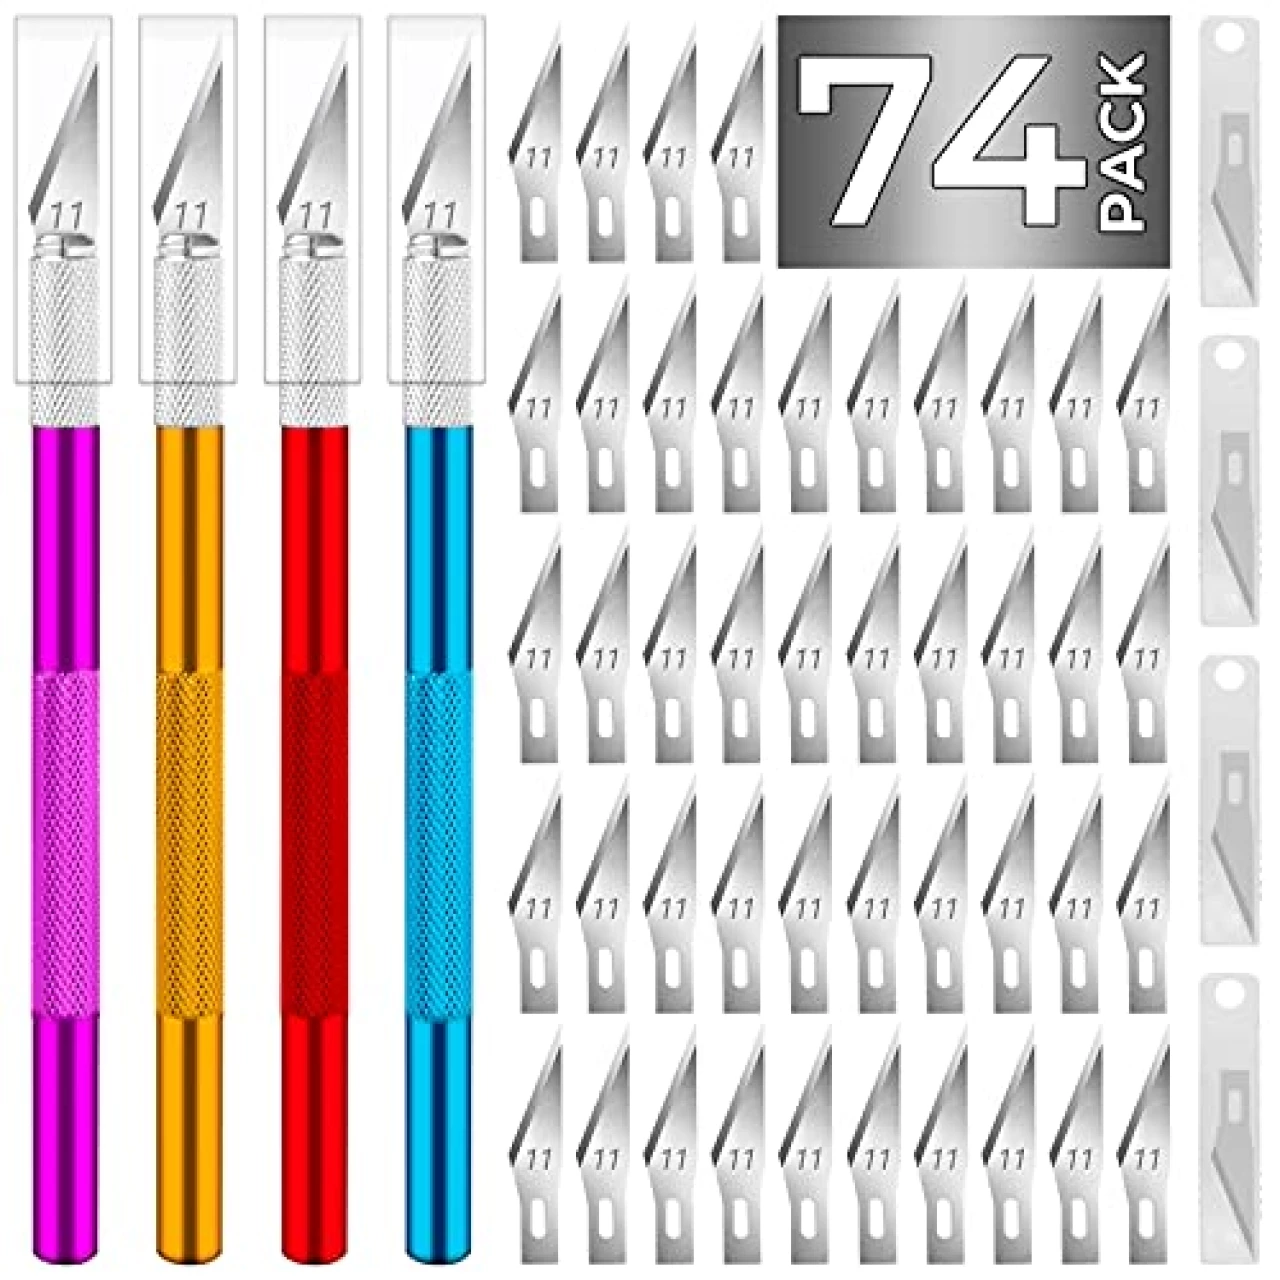 JTIEO 74 Pack Hobby Knife Exacto Knife with 4 Upgrade Sharp Hobby Knives and 70 Spare Craft Knife Blades for Art, Scrapbooking,Stencil